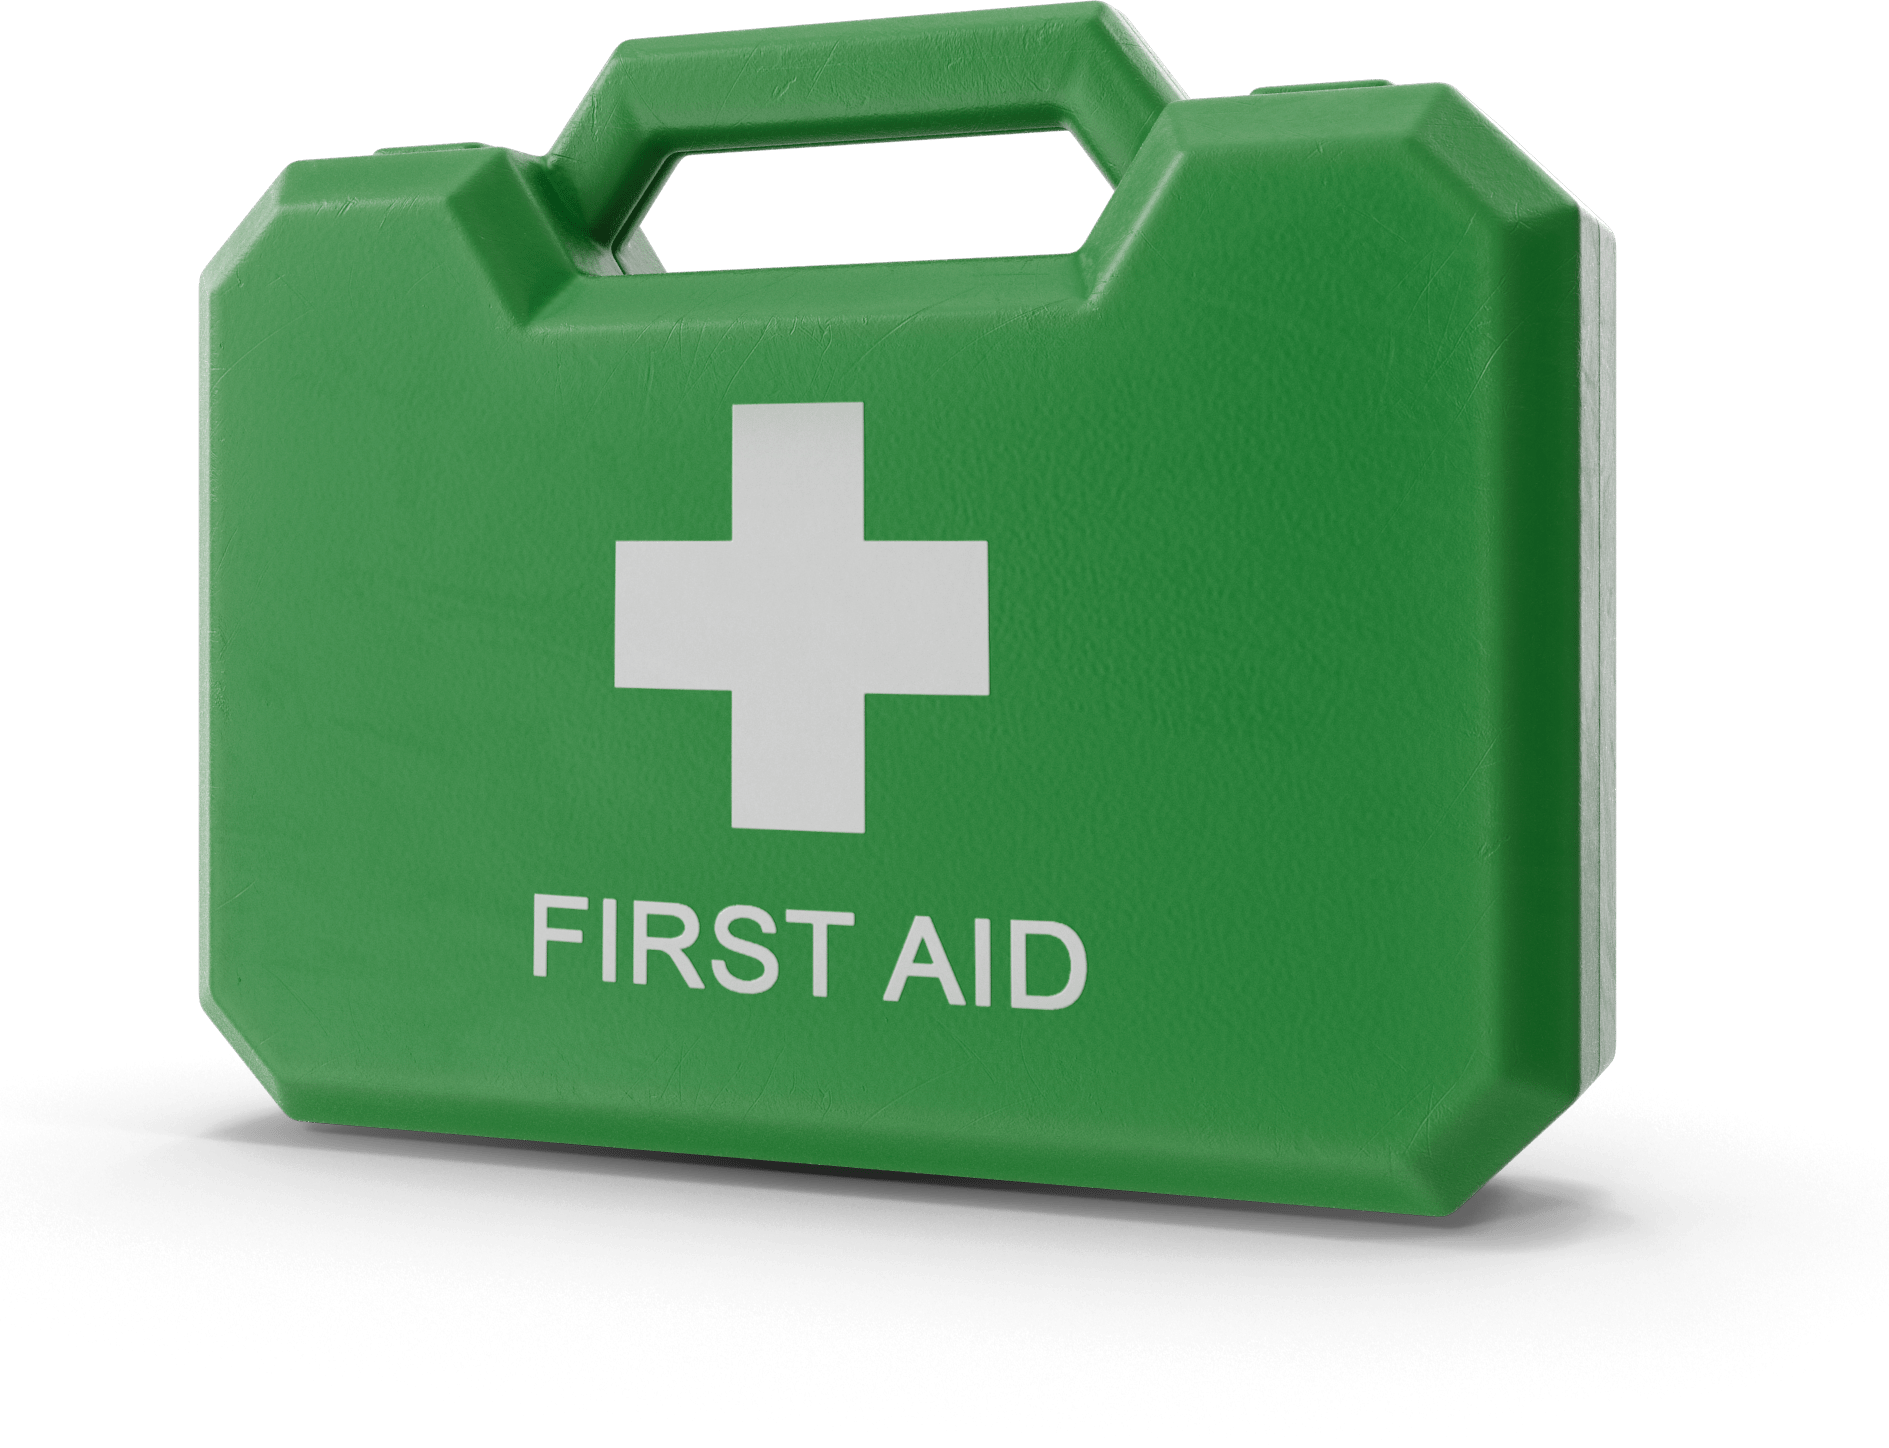 First Aid Training, Basic First Aid Training, Health and safety training